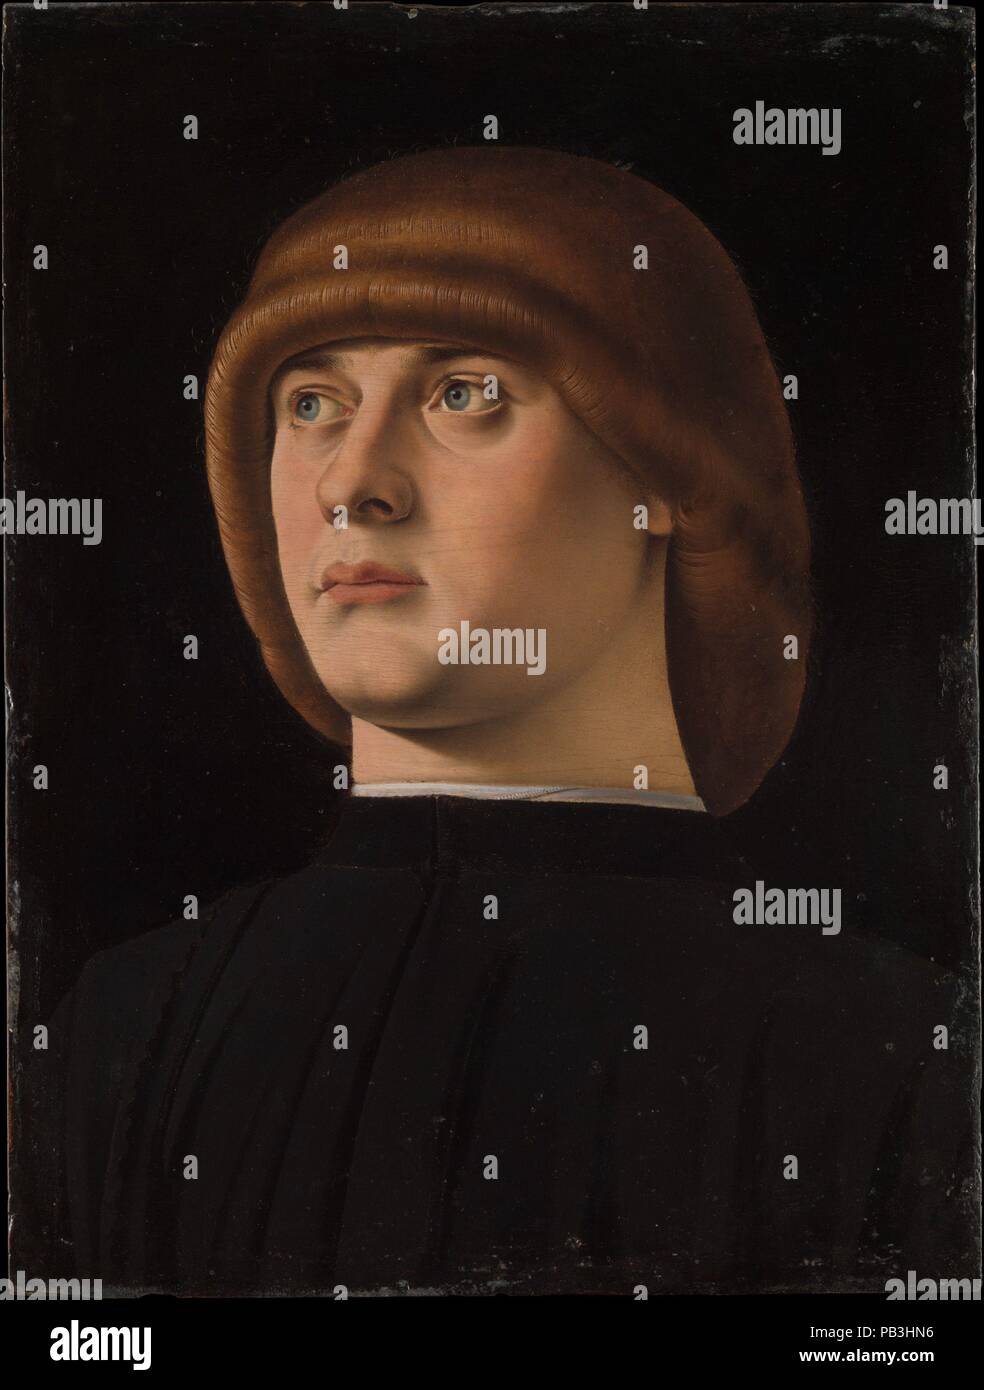 Portrait of a Young Man. Artist: Jacometto (Jacometto Veneziano) (Italian, active Venice by ca. 1472-died before 1498). Dimensions: 11 x 8 1/4 in. (27.9 x 21 cm). Date: 1480s.  A brilliant miniature painter, Jacometto was also outstanding at portraits. He was much influenced by the Sicilian painter Antonello da Messina, who worked in Venice in 1475-76, but Jacometto's portraits have a crystalline clarity, enhanced by the black background. The distinctive hairstyle--a zazzera--was fashionable in Venice in the 1480s and 90s. Museum: Metropolitan Museum of Art, New York, USA. Stock Photo